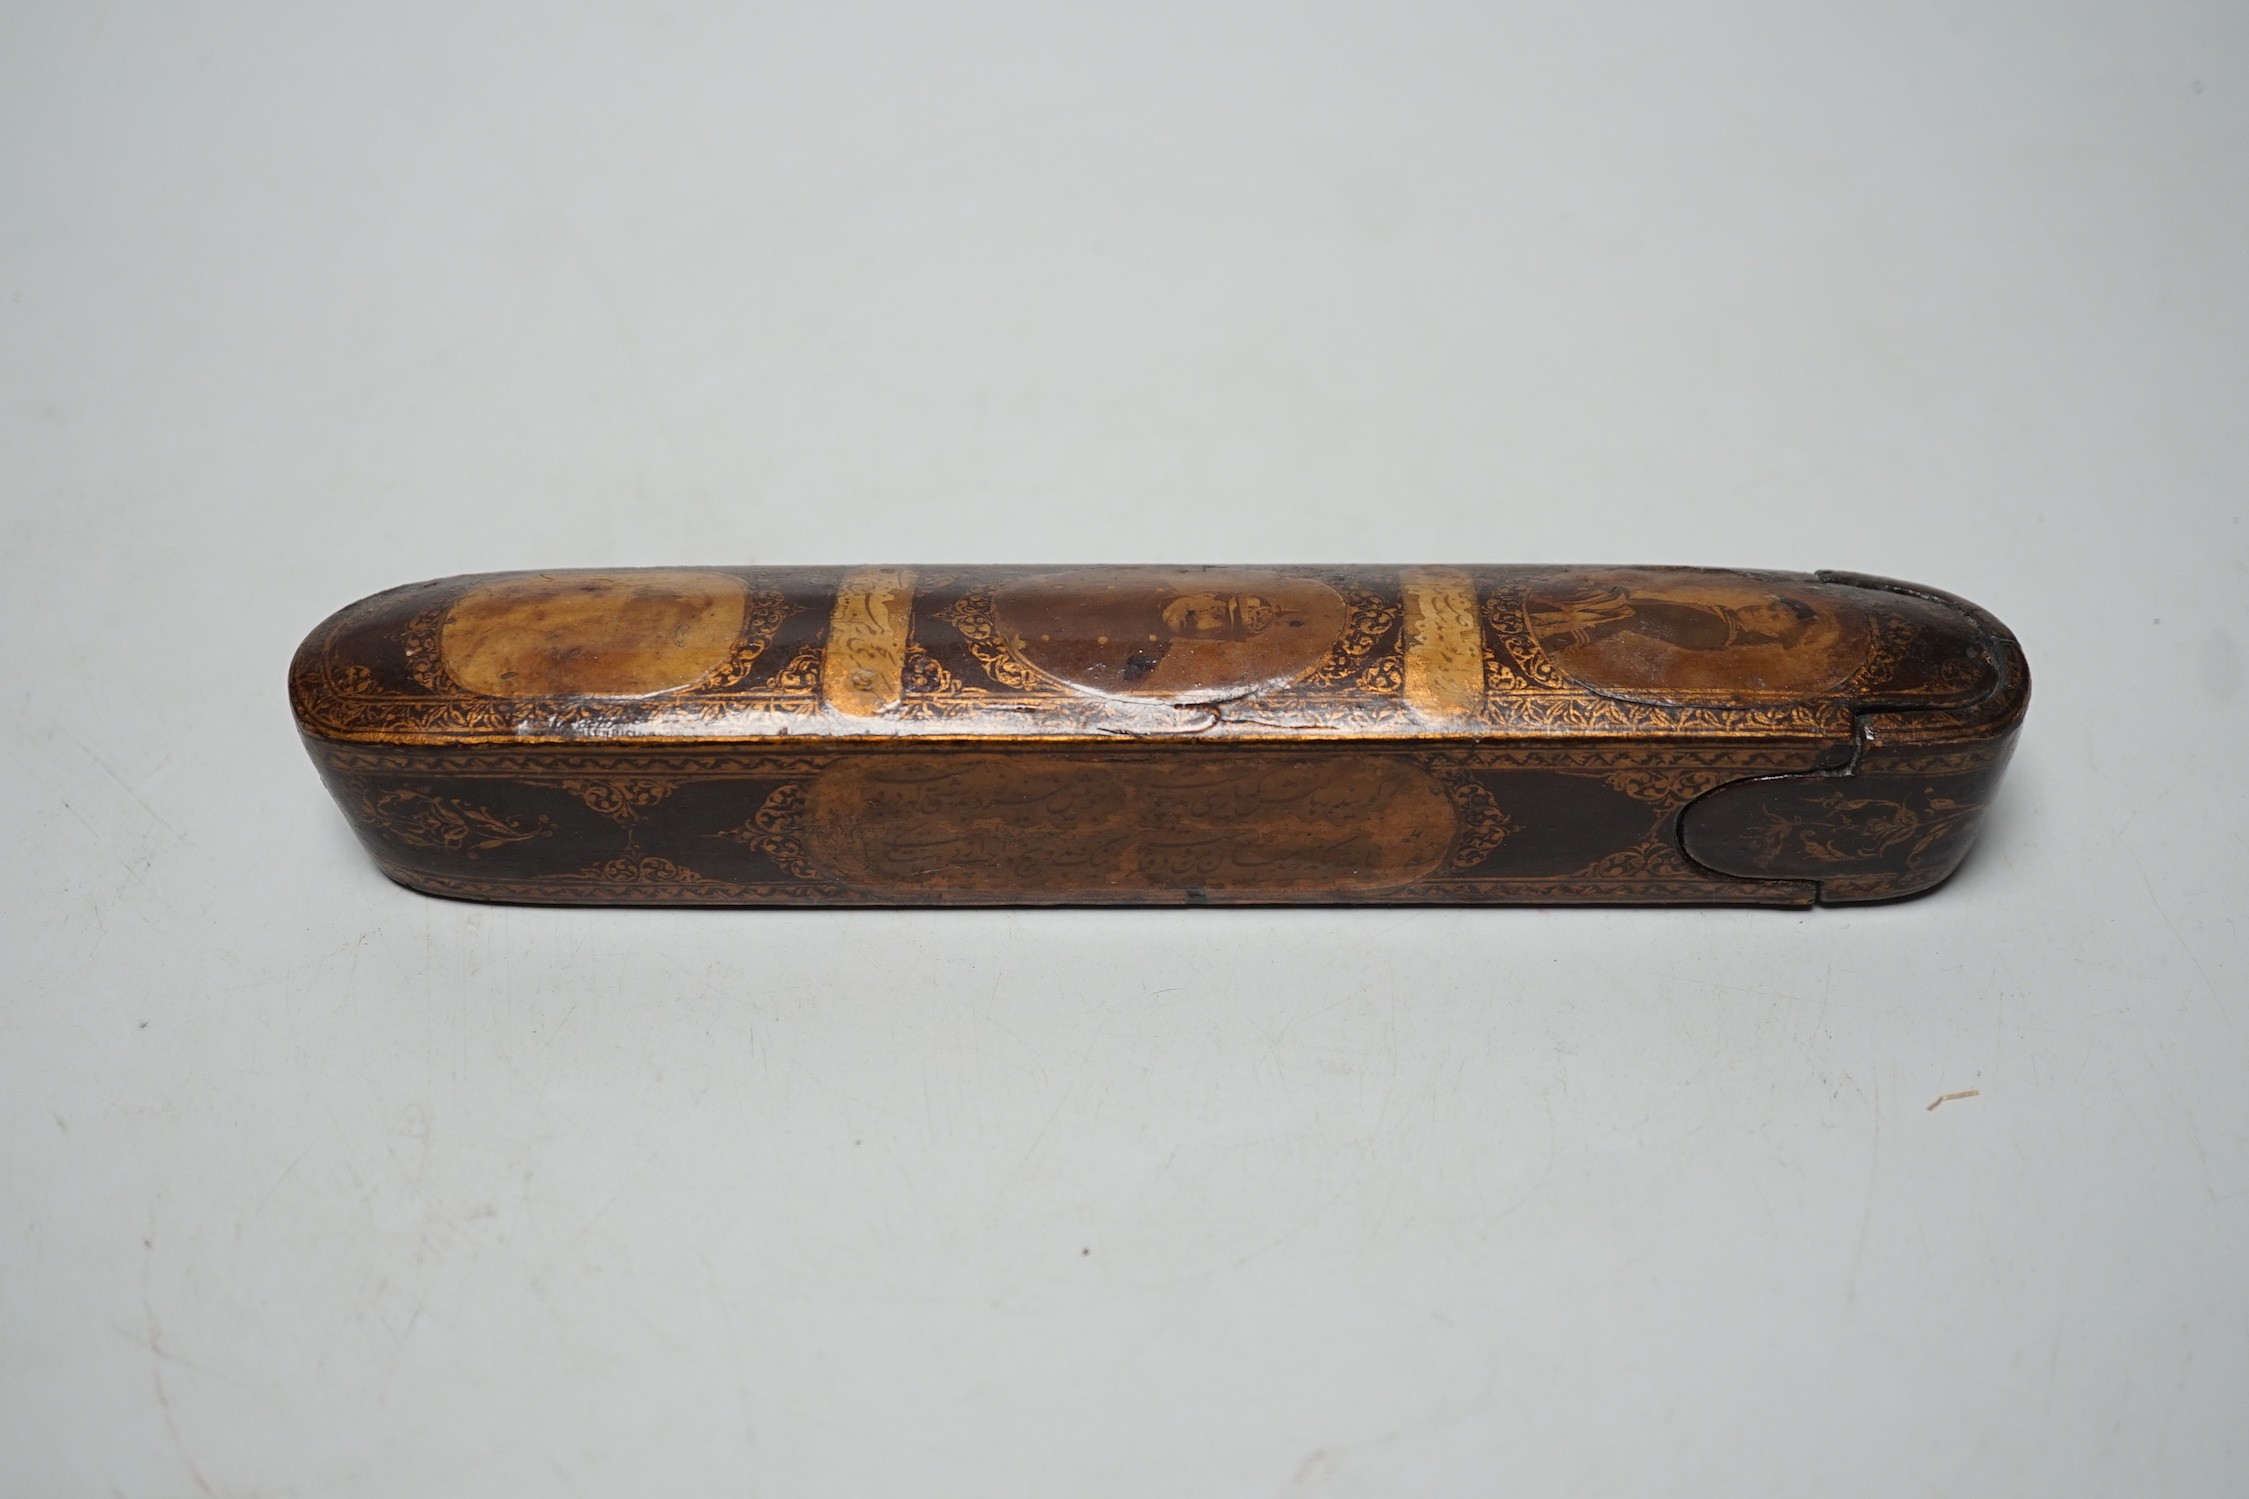 A 19th century Persian lacquered pen tray with later applied German portraits, total length 20cm